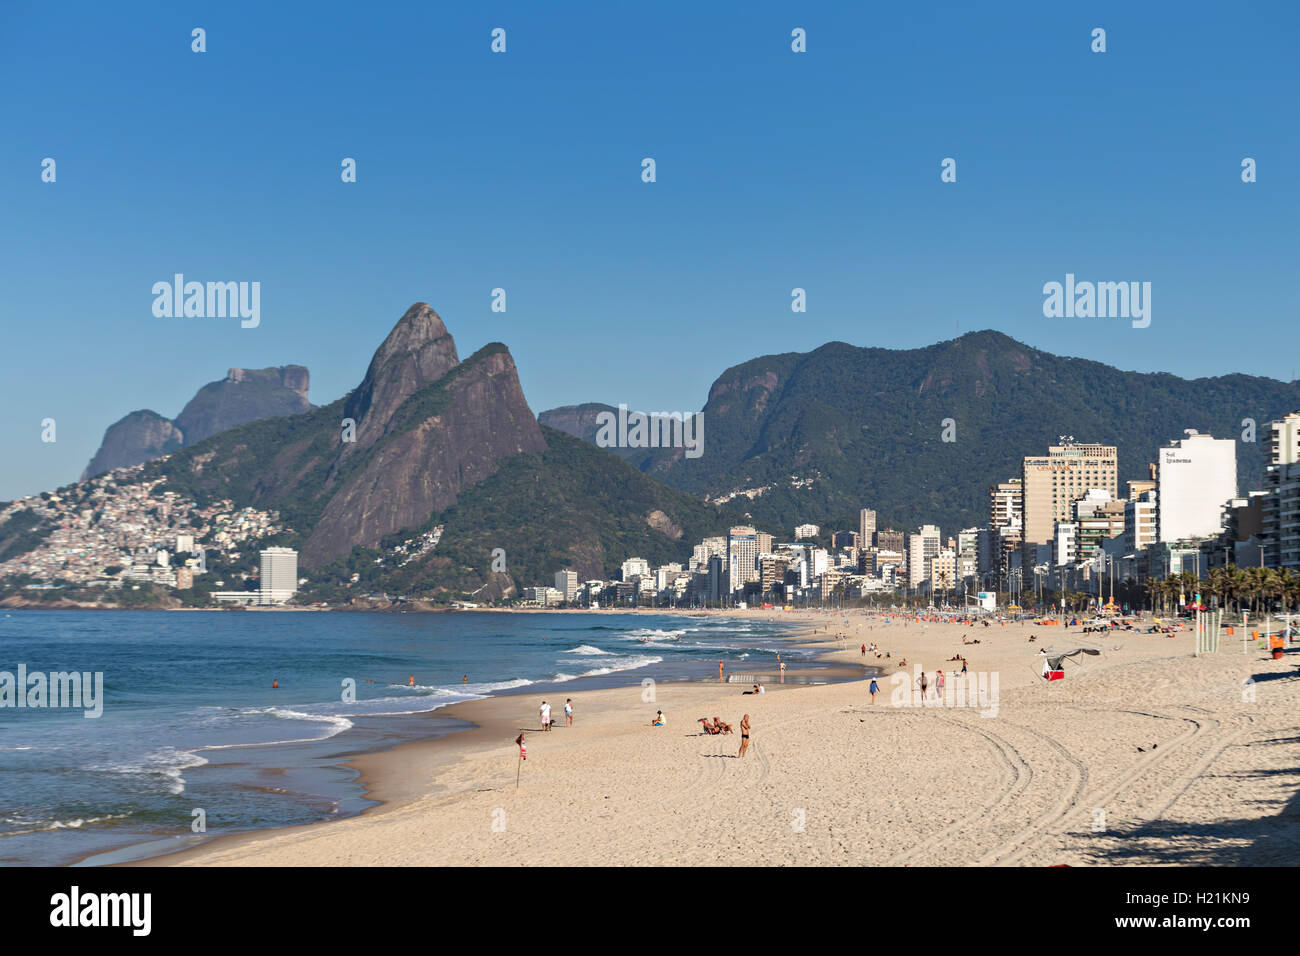 Ipanema beach and Two Brothers Mountain early morning in Rio de Janeiro, Brazil. Stock Photo